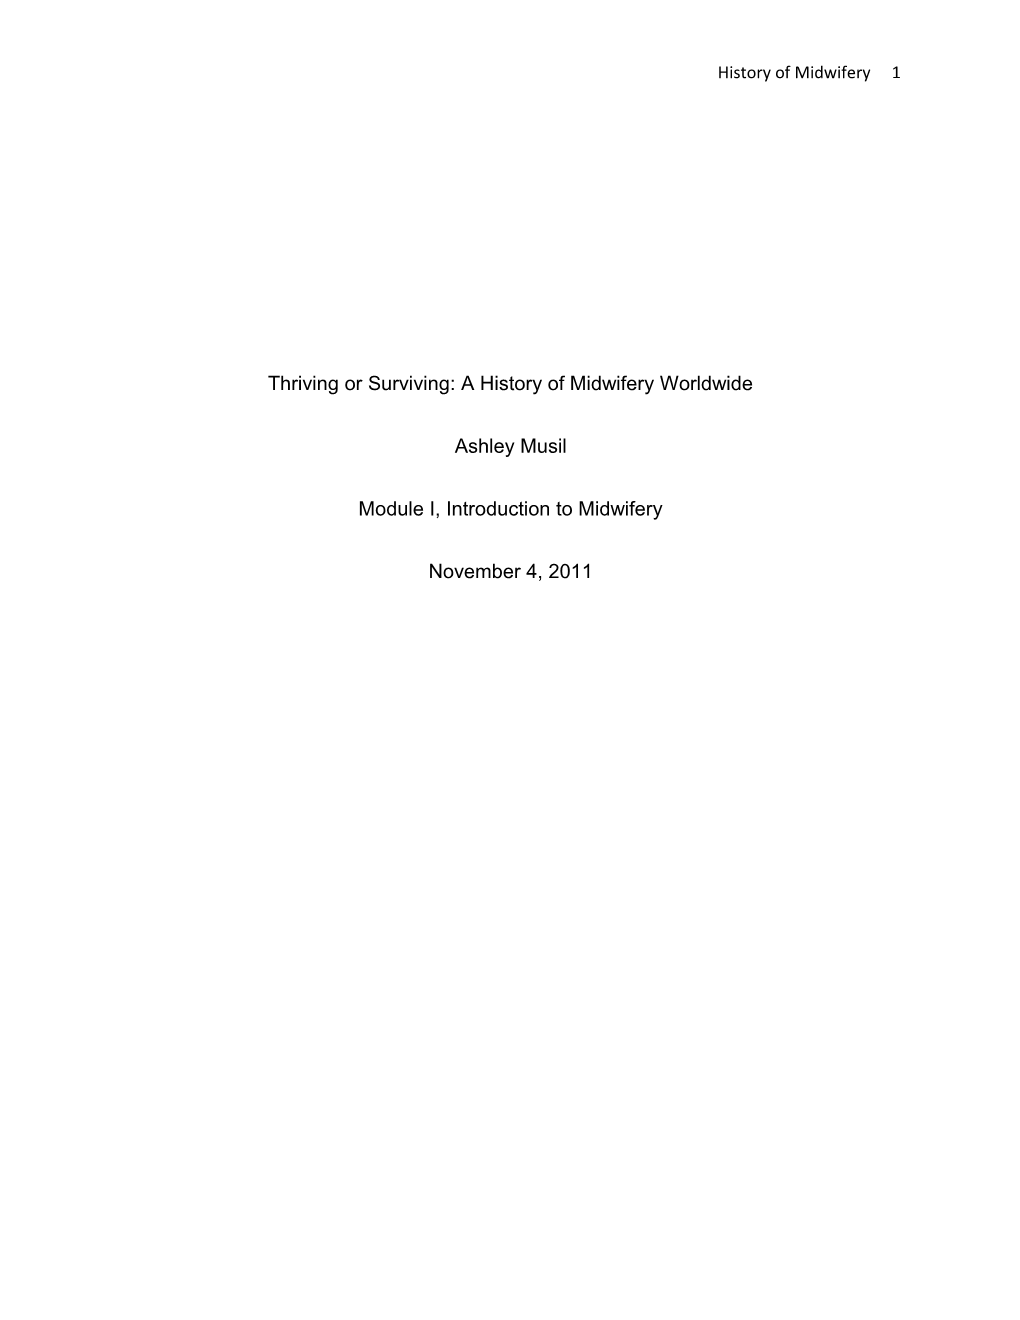 Thriving Or Surviving: a History of Midwifery Worldwide